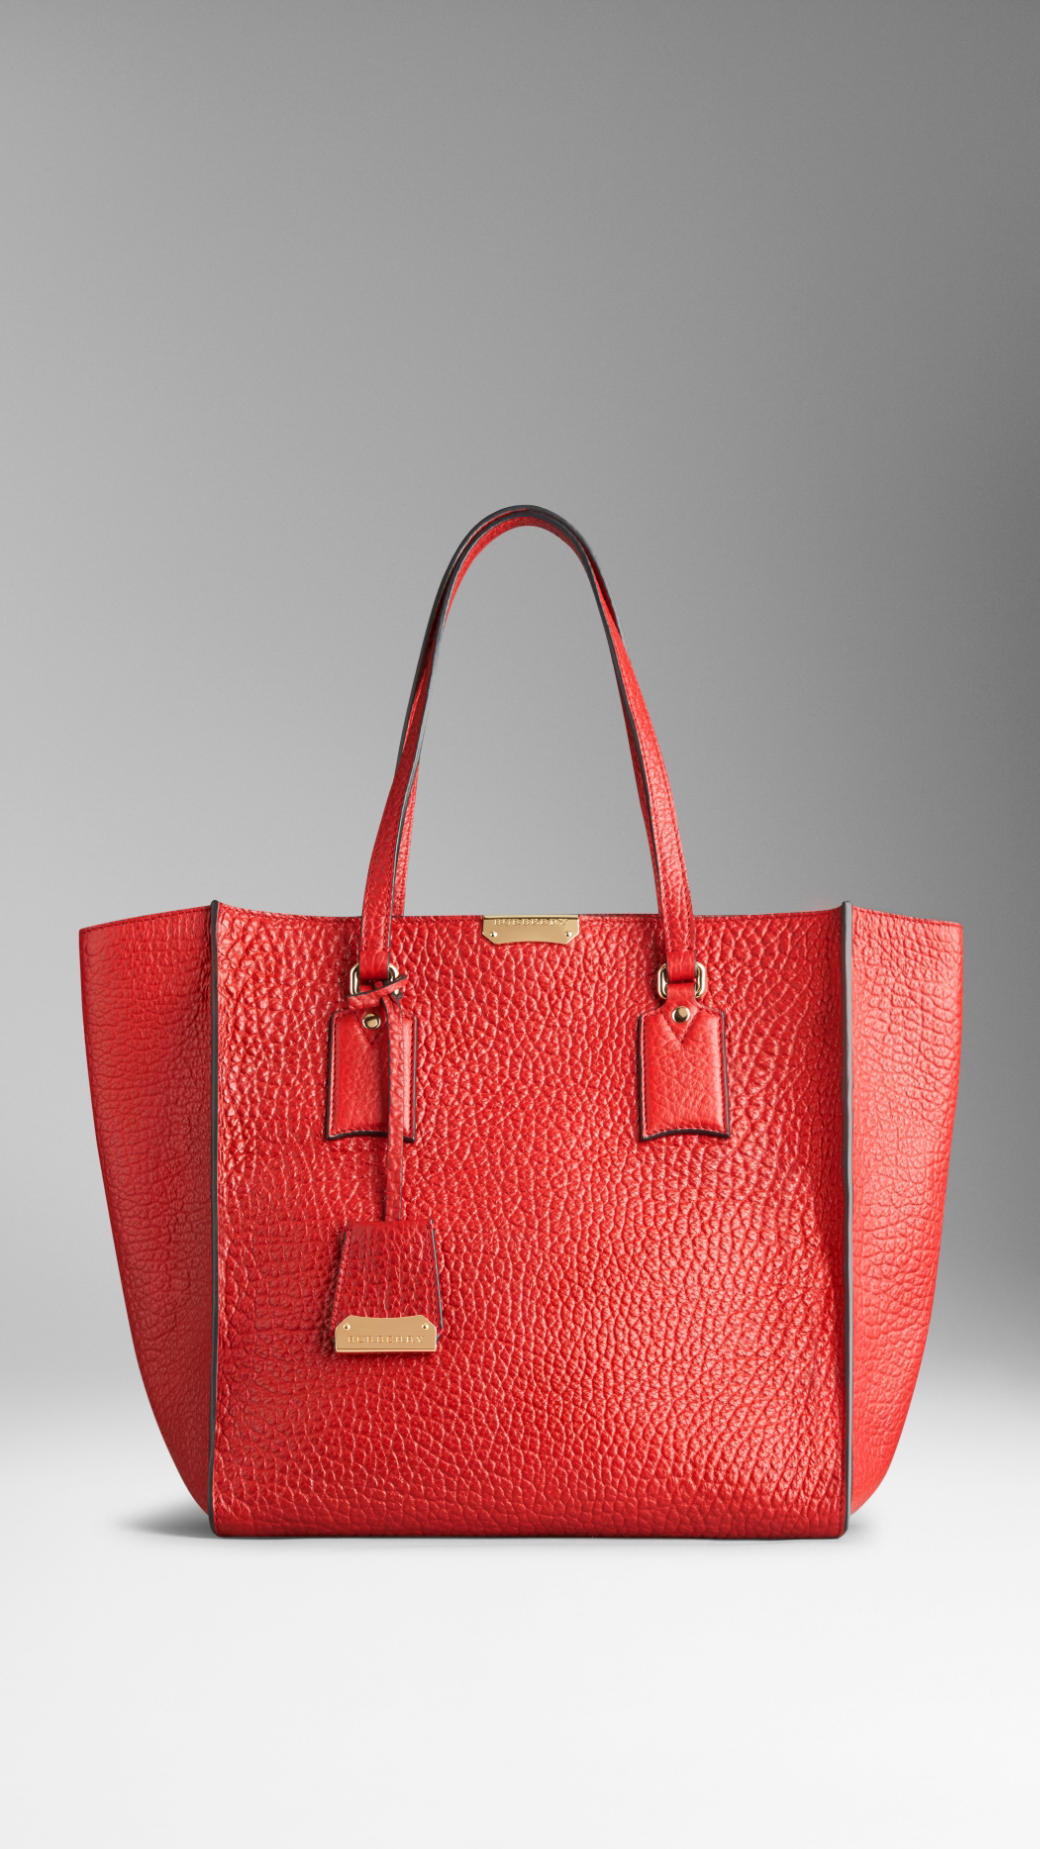 Burberry Medium Signature Grain Leather Tote Bag in Red (military red ...